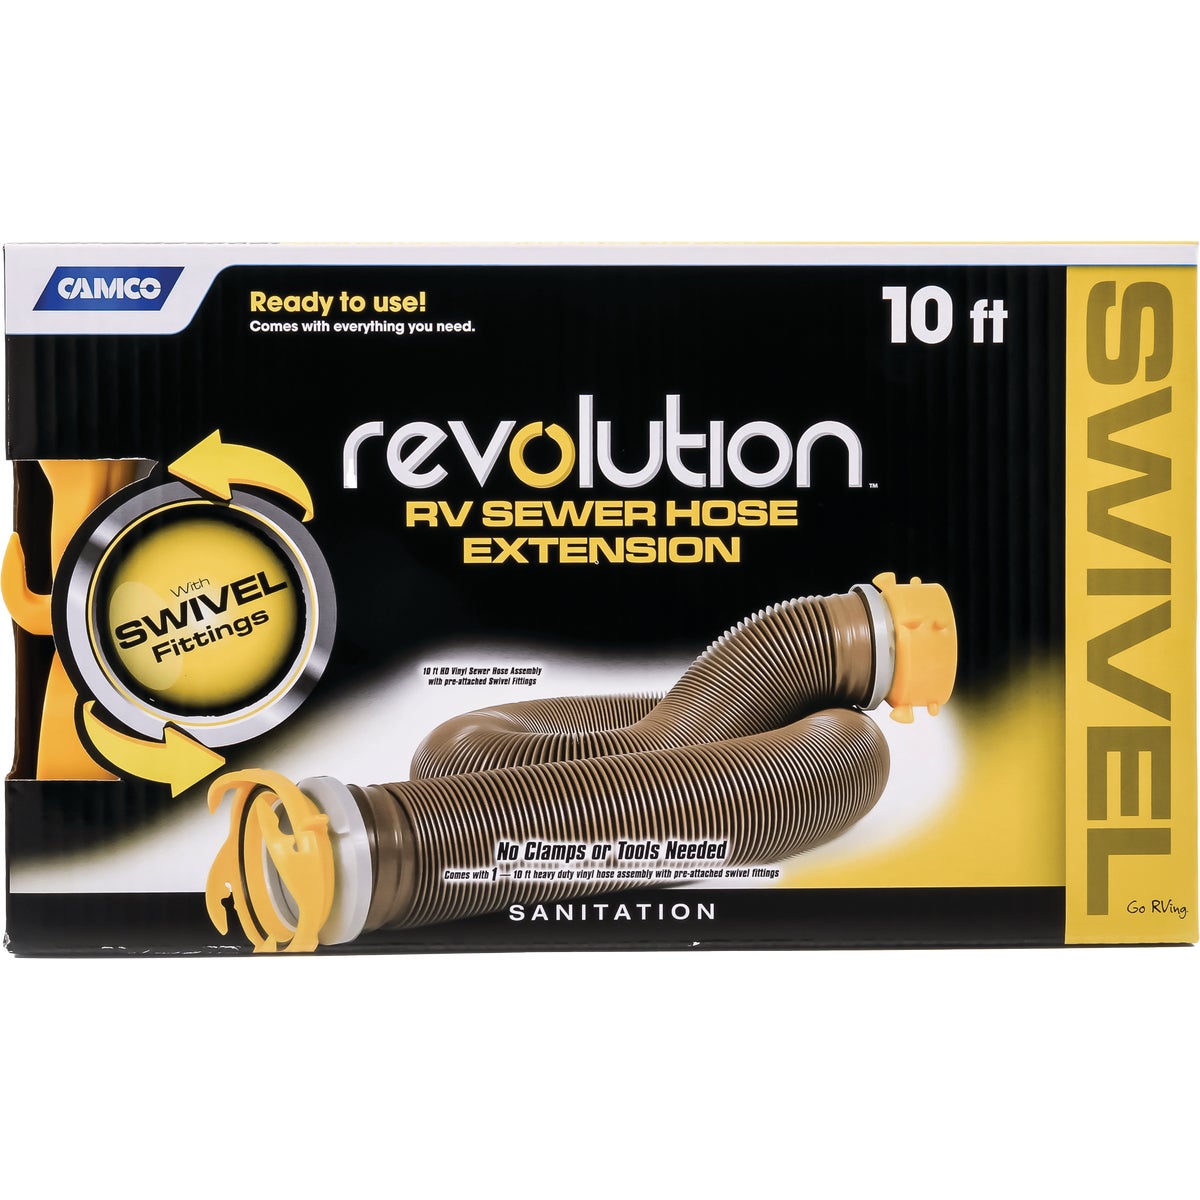 Camco Revolution 360 10 Ft. Heavy Duty Sewer Hose with Swivel Fittings